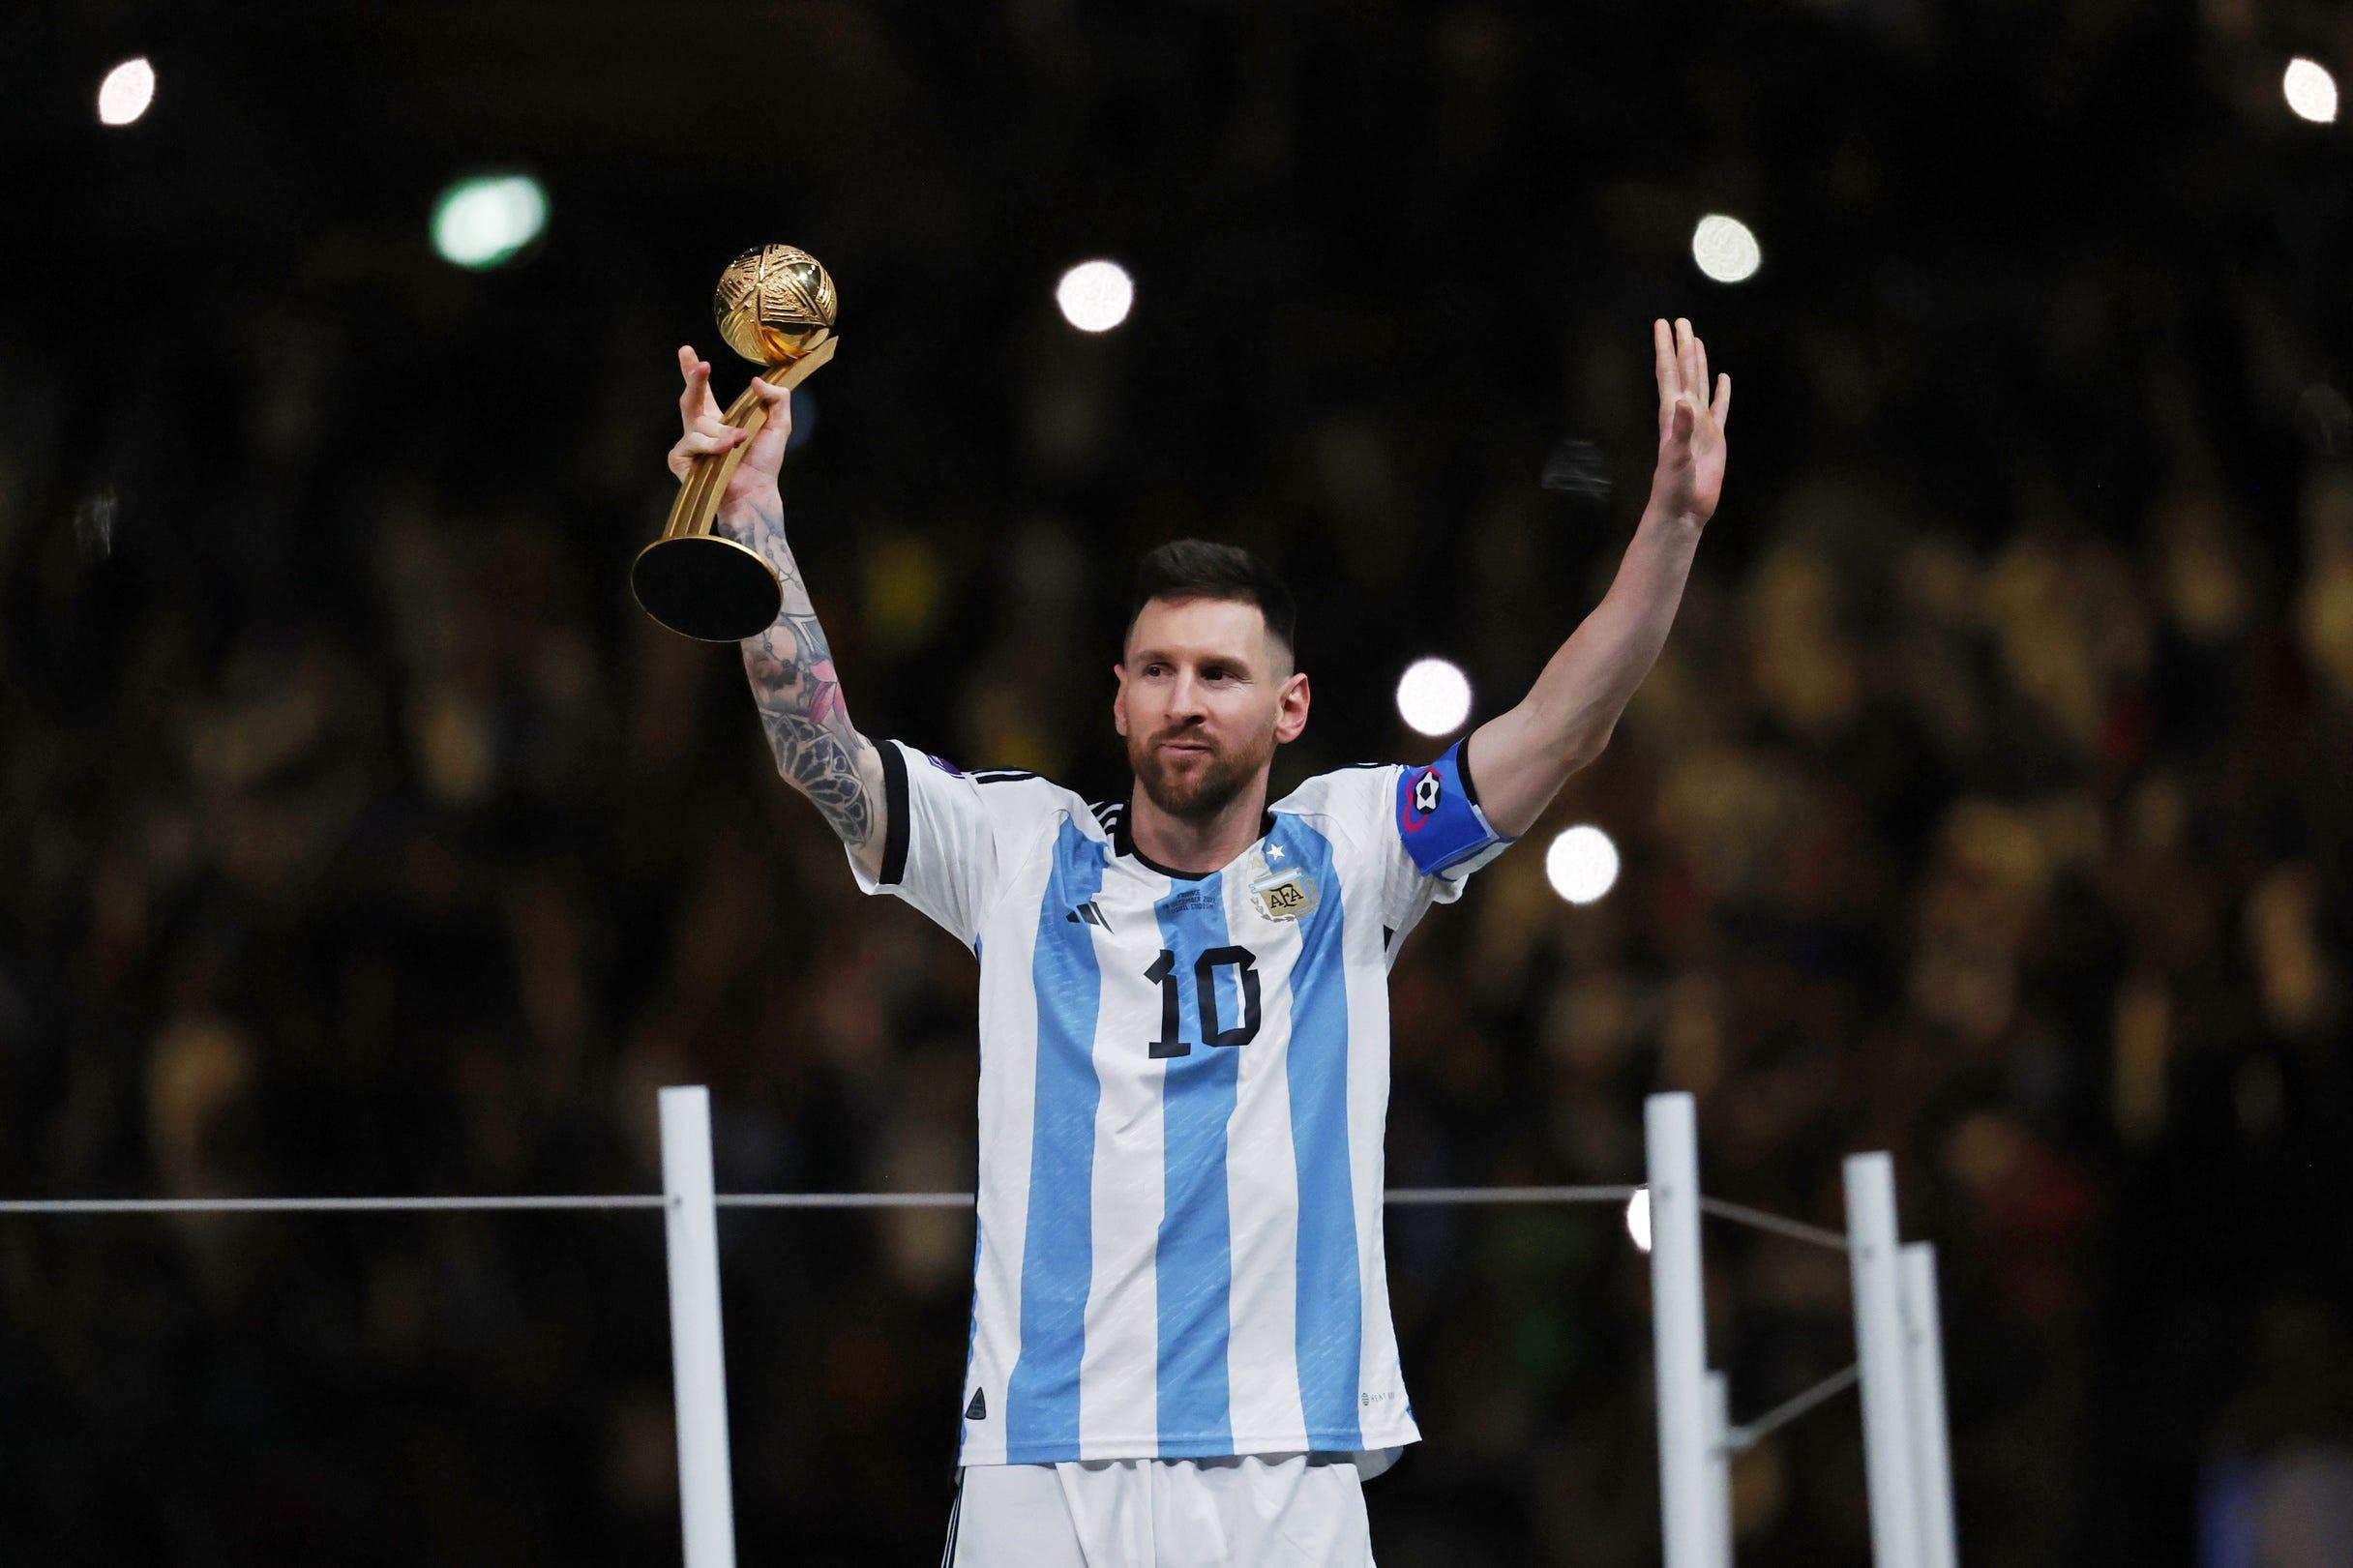 Lionel Messi: Updates on new Adidas cleats design inspired by World Cup victory